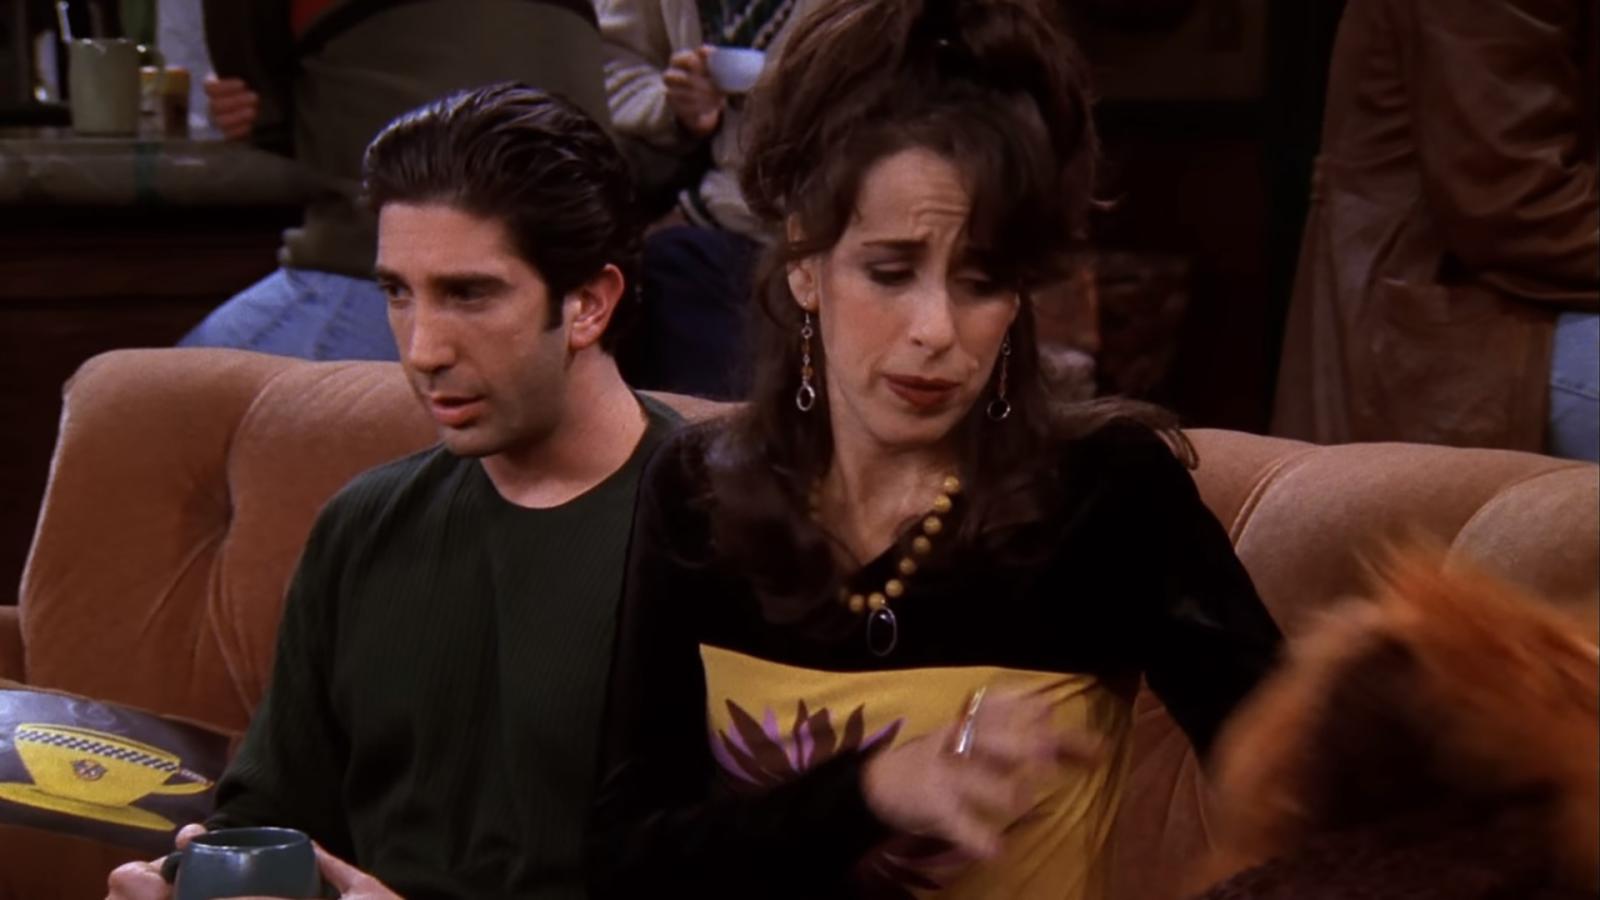 The Friends Character We All Secretly Love: Why Janice is a Fan Favorite Despite Being Annoying - image 1